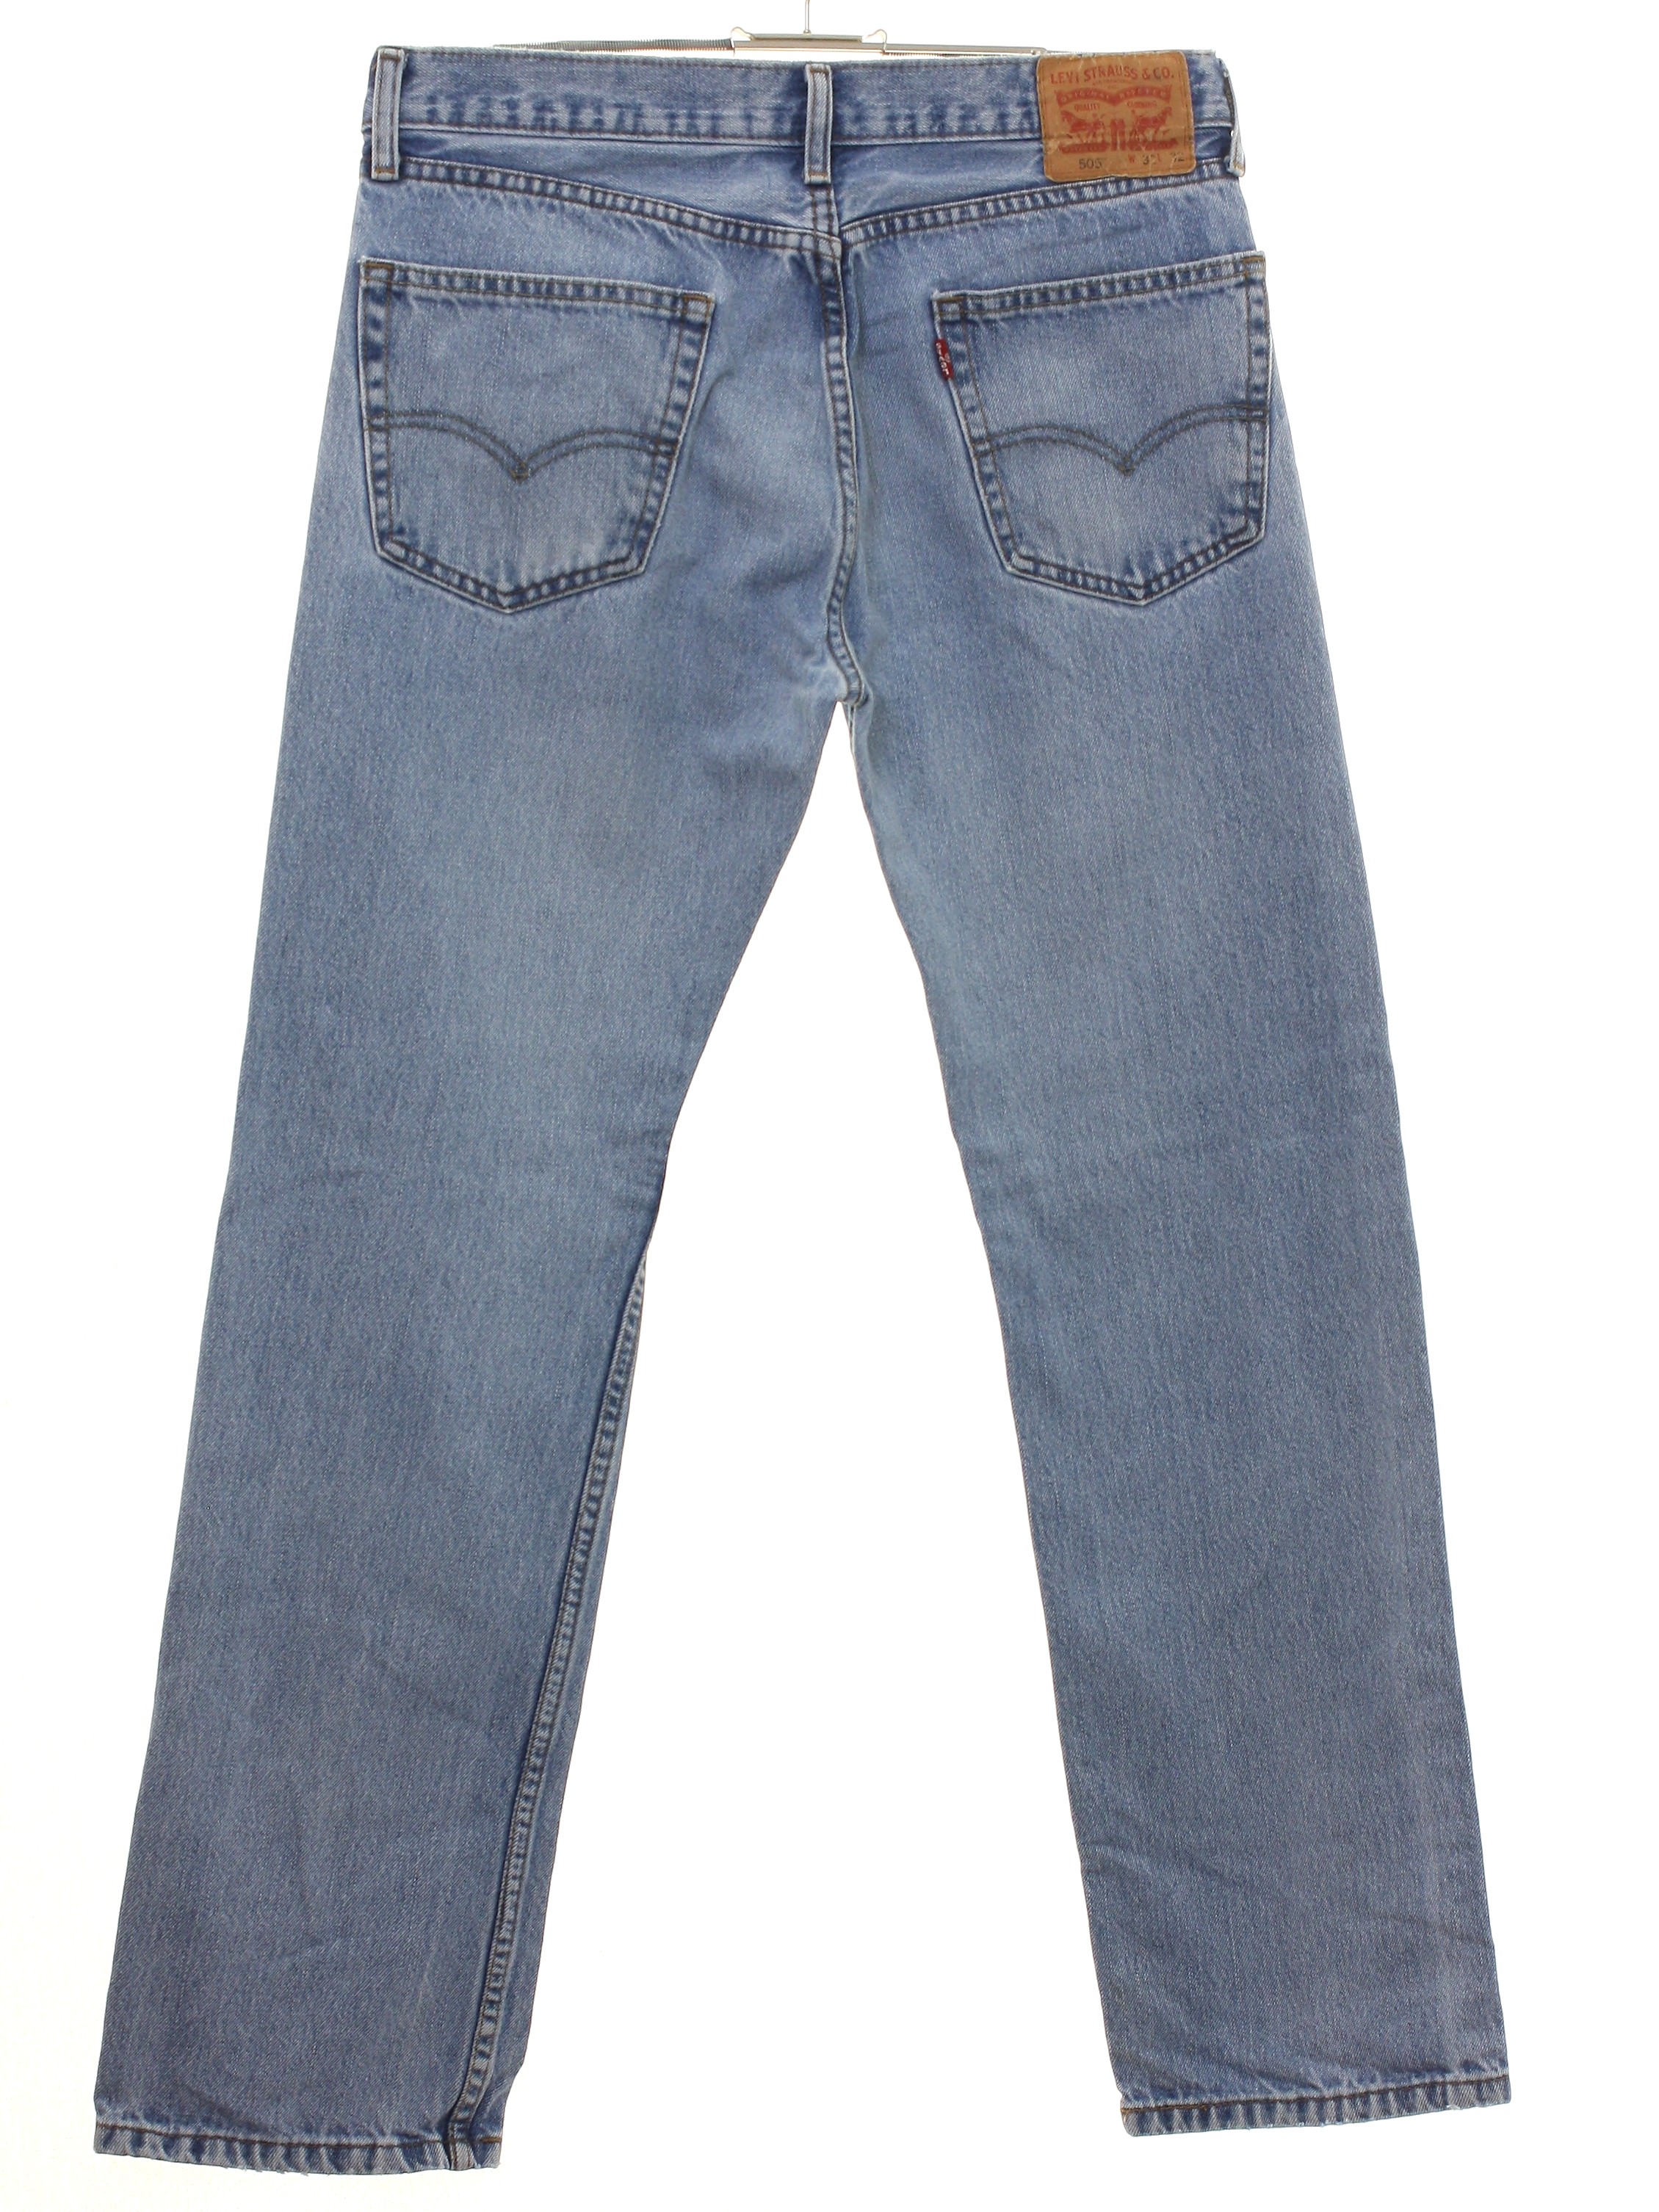 Pants: 90s -Levis 505- Mens slightly faded and worn light blue wash ...